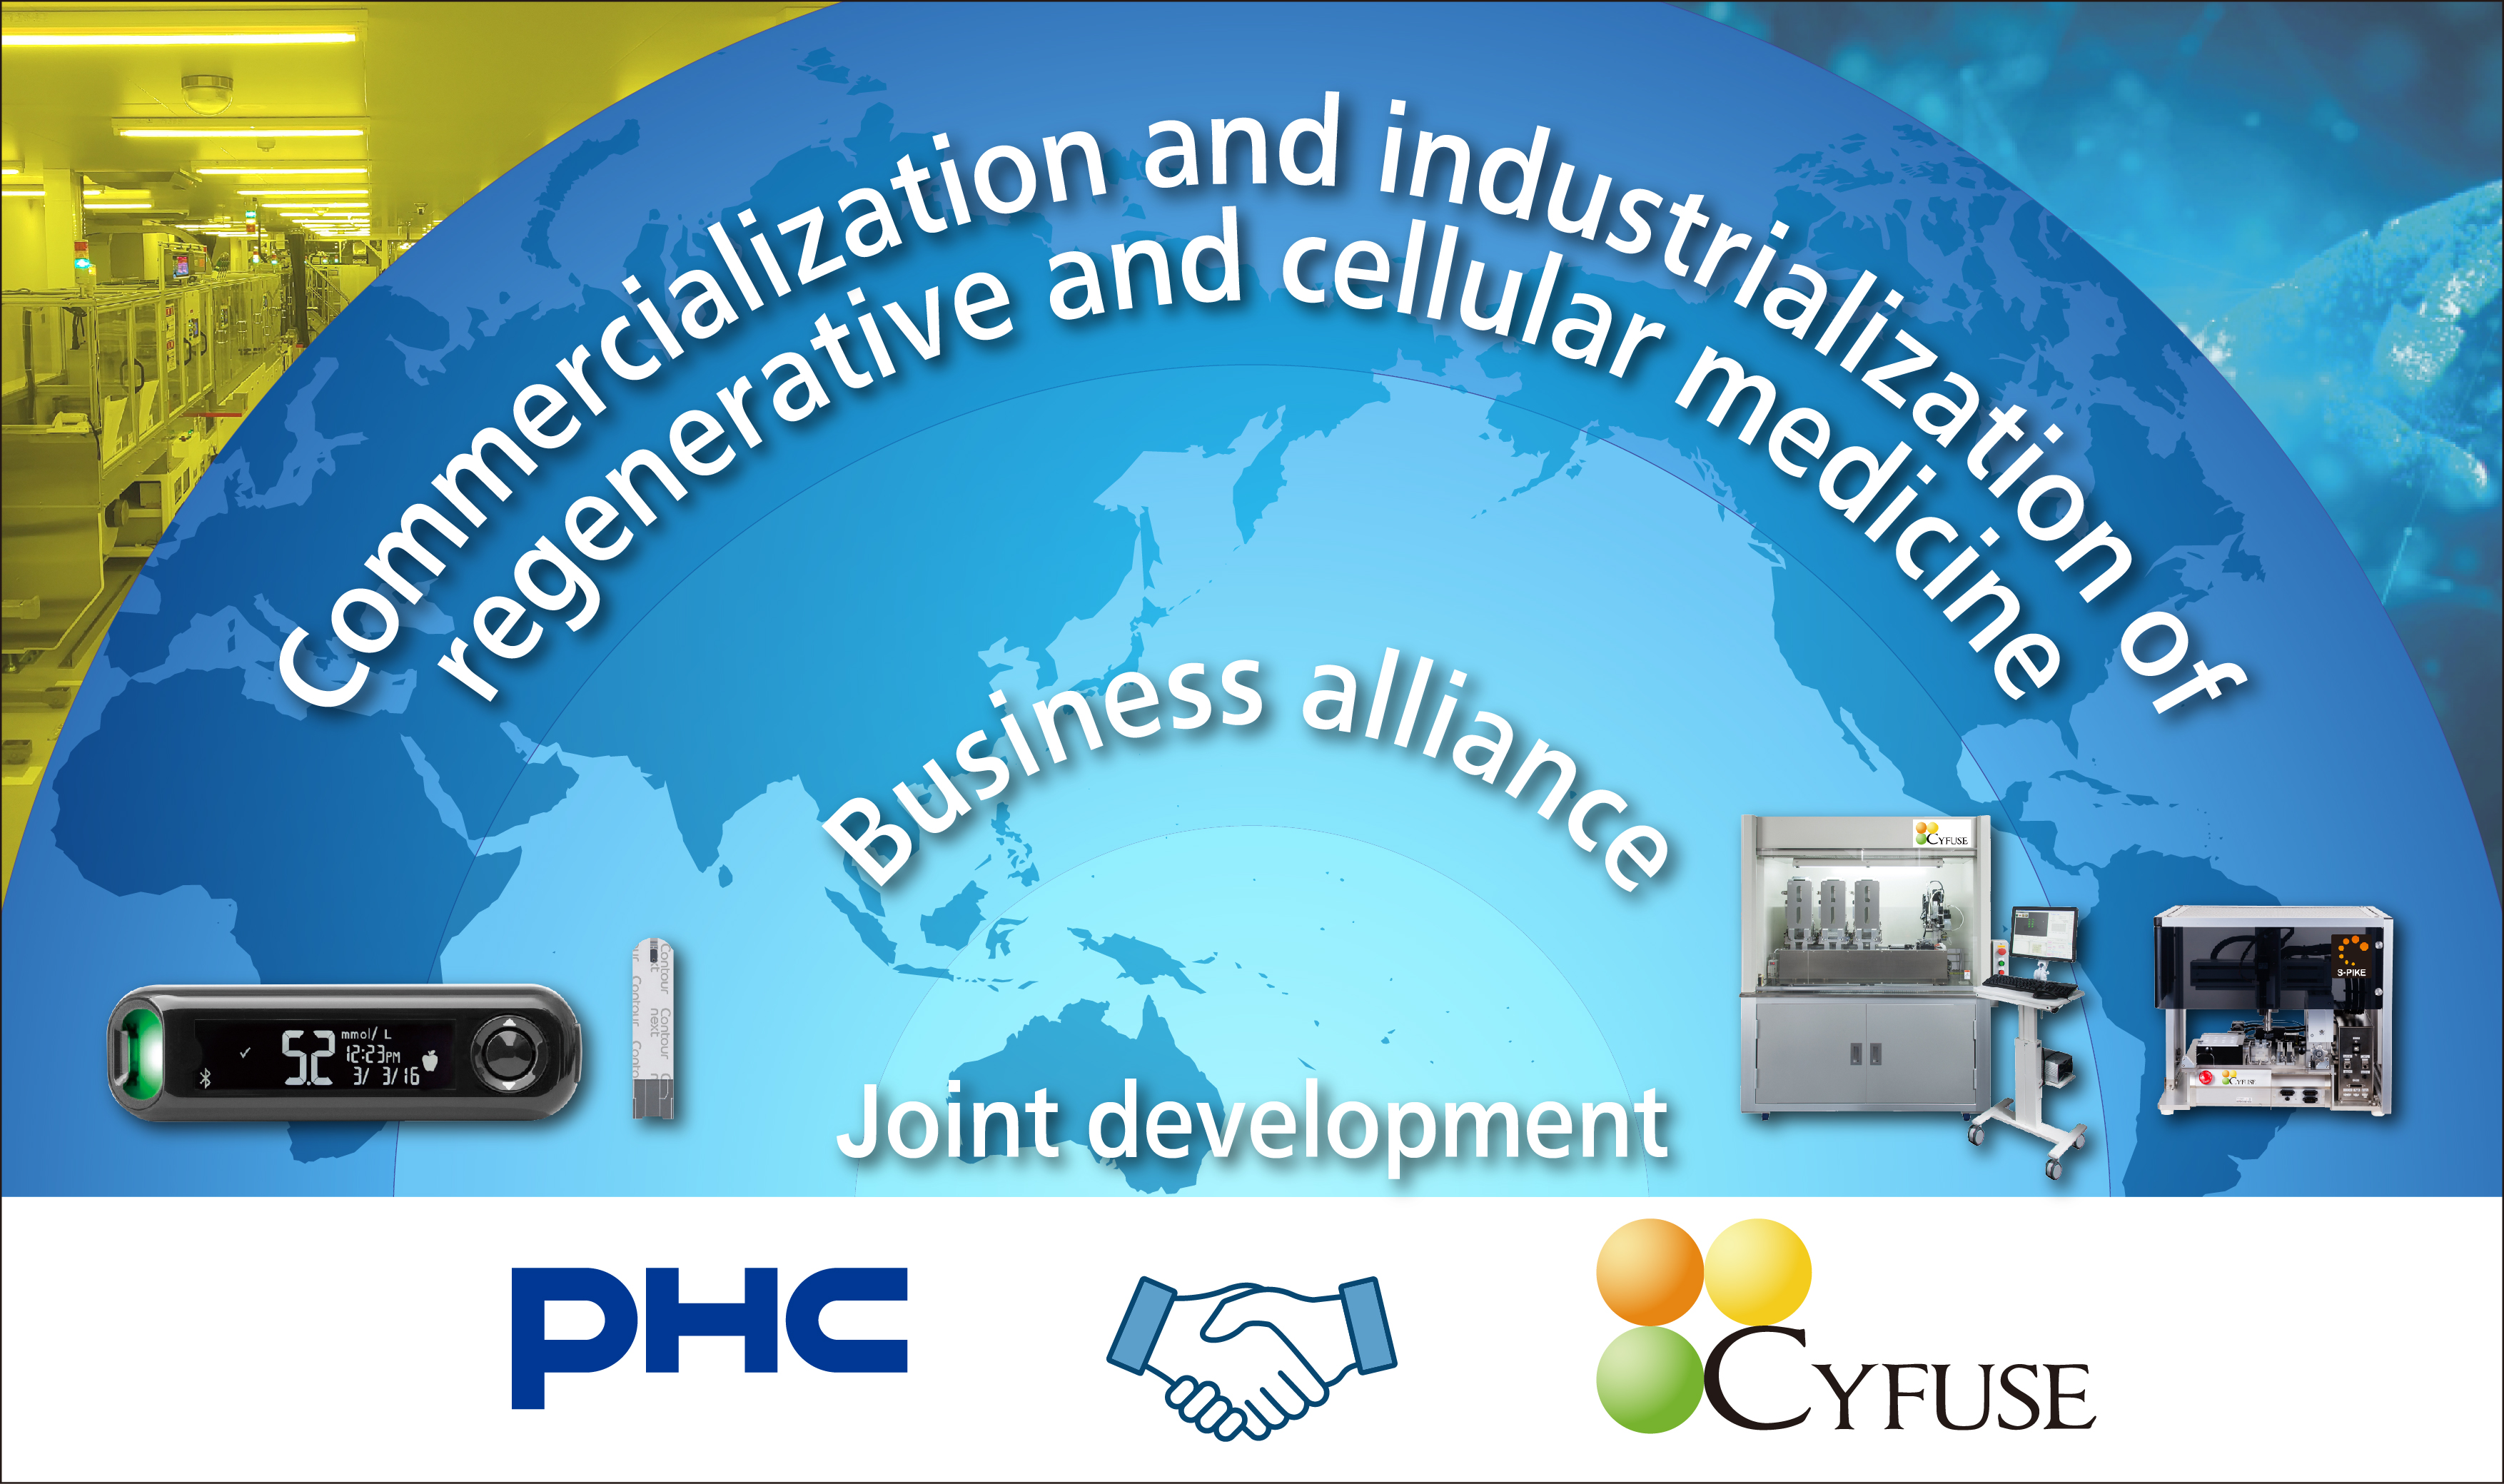 PHC and Cyfuse Strategic Alliance